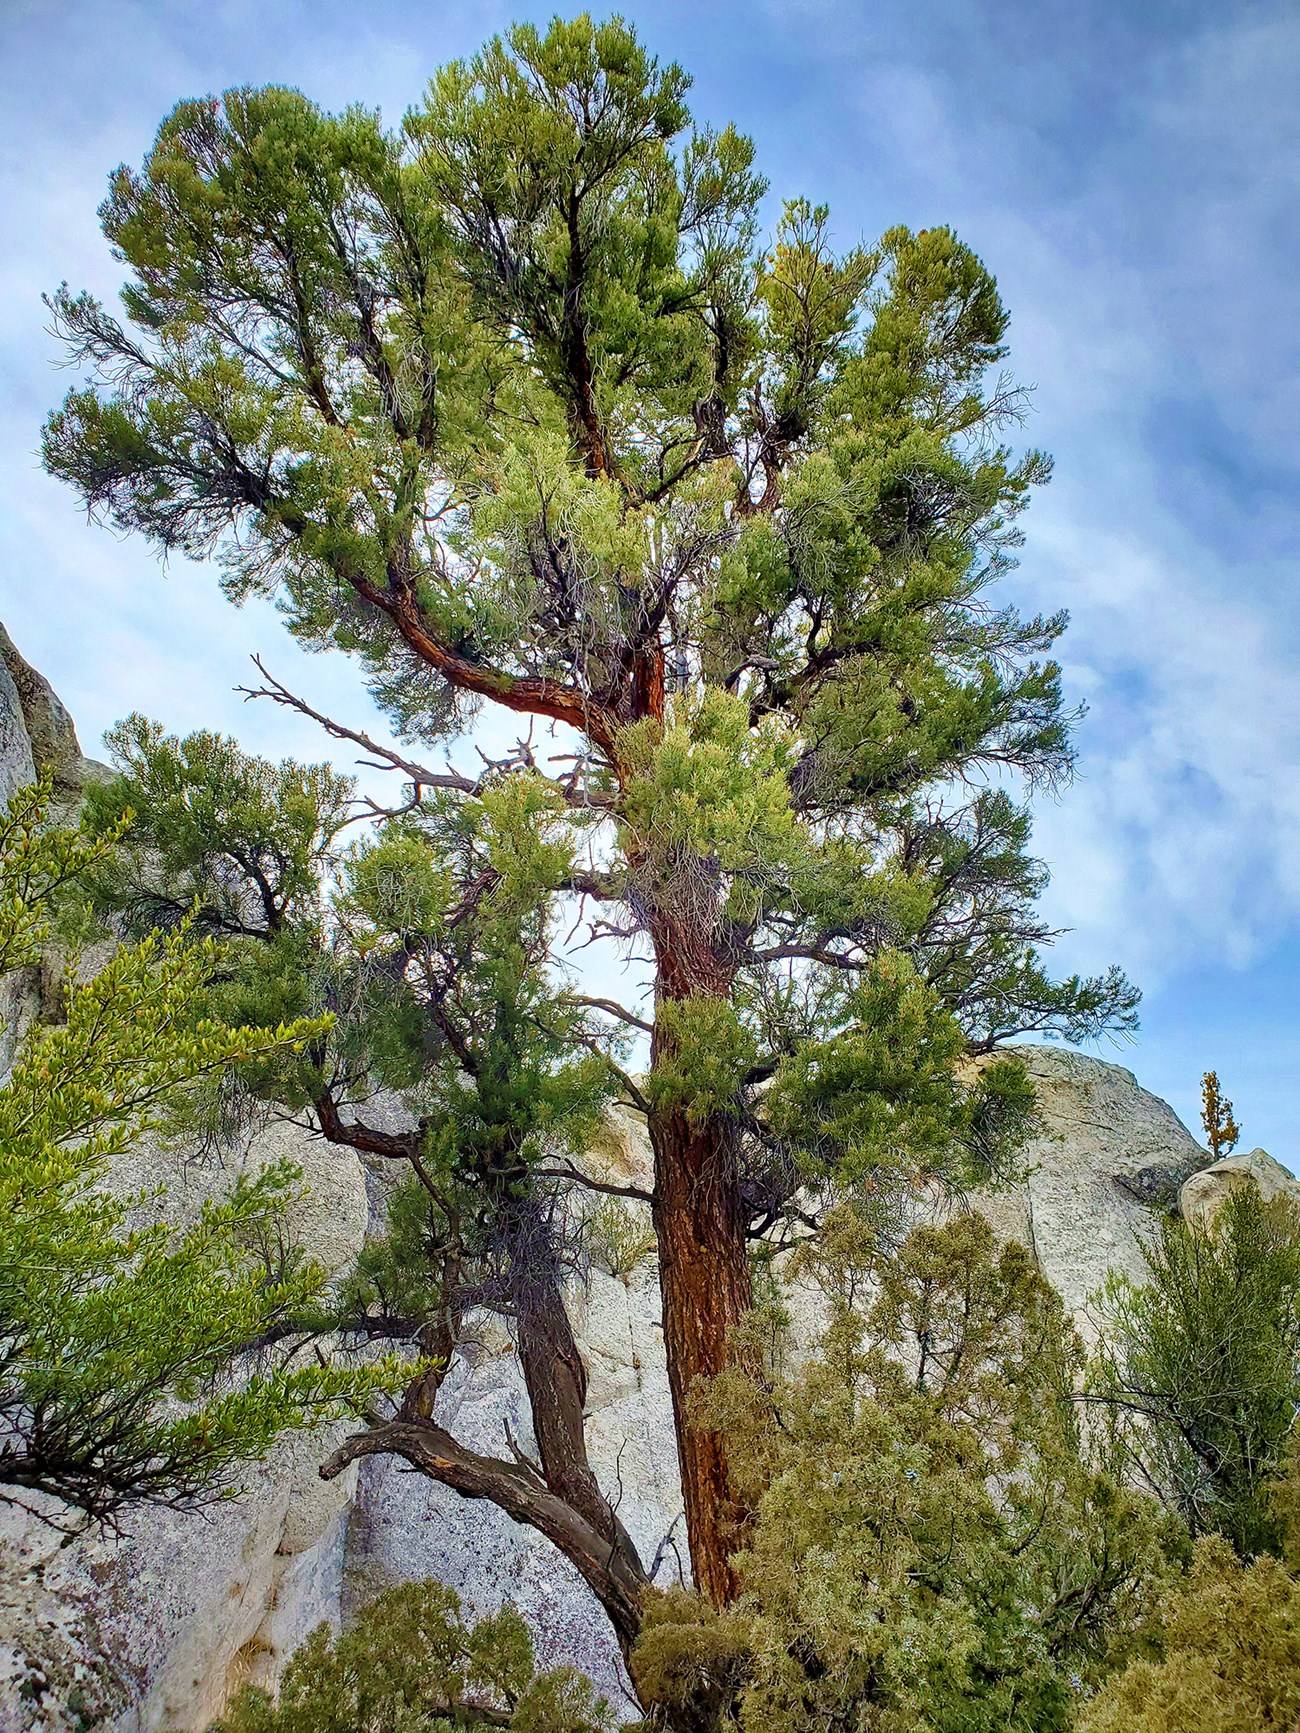 A tall tree stands in front of granitic rocks